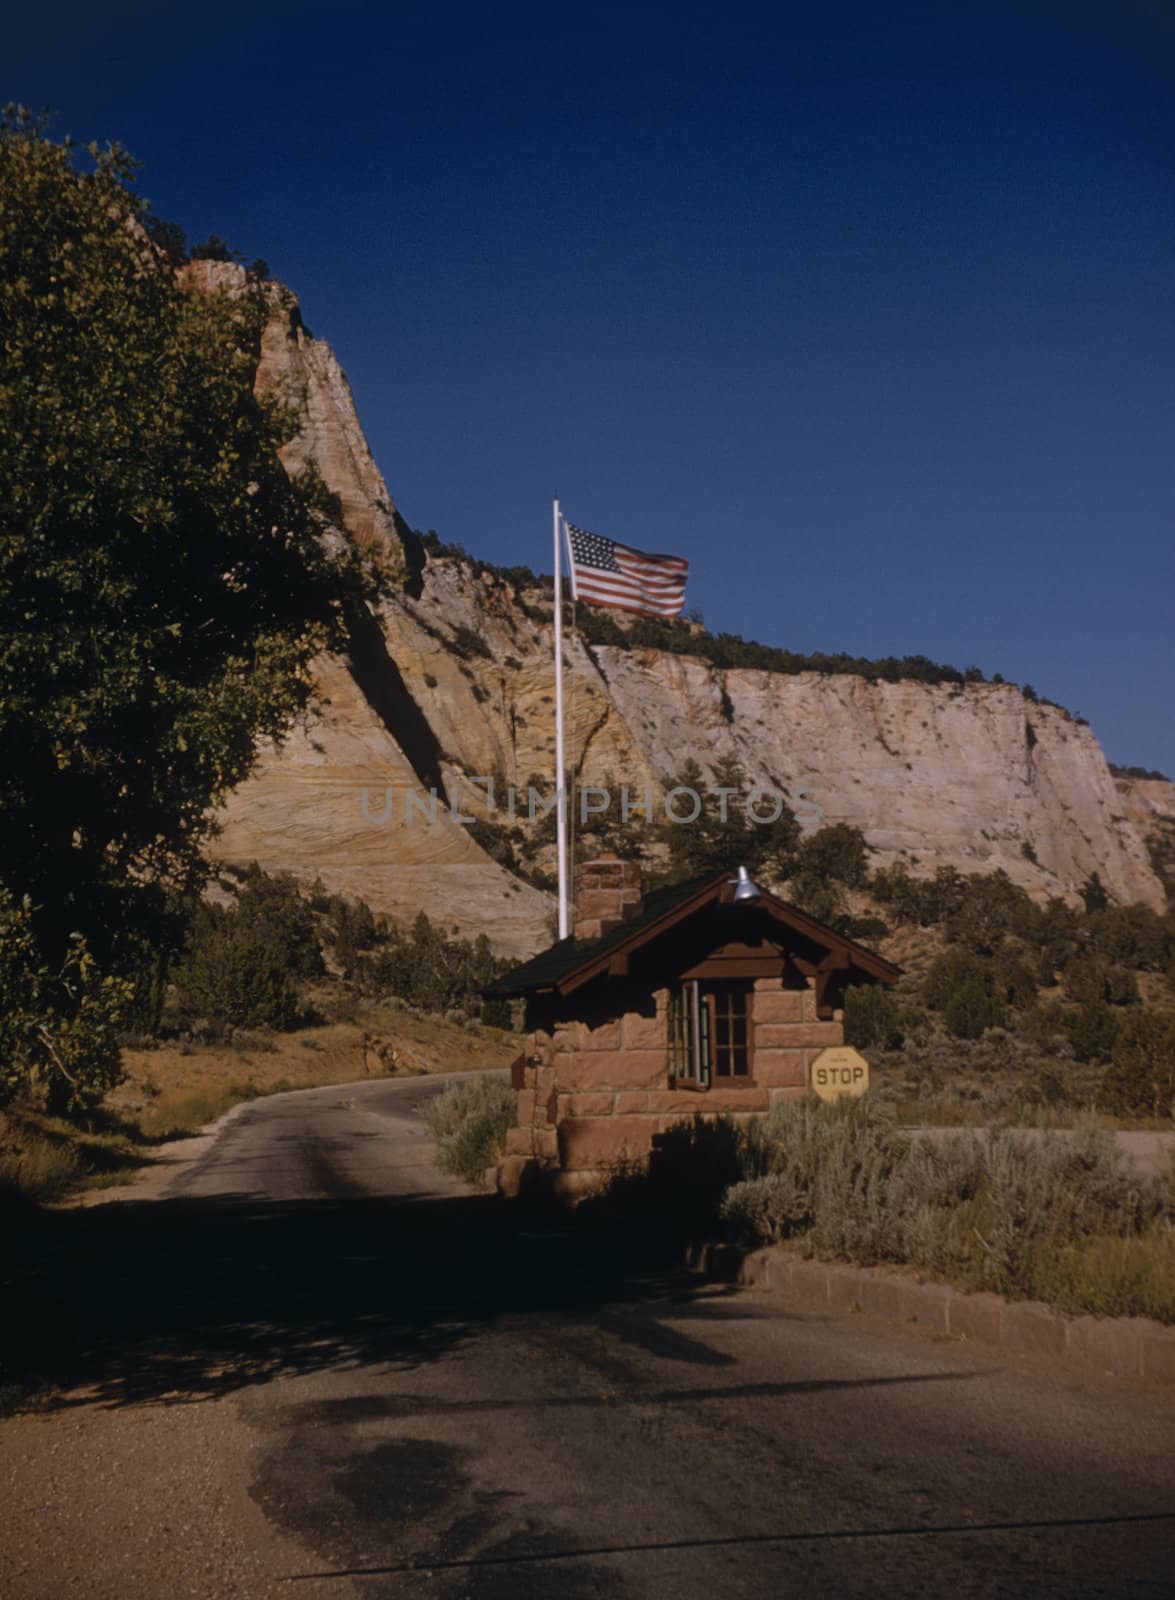 Mountain house over a rocky cliff in a landscape image, Zion National Park, Utah